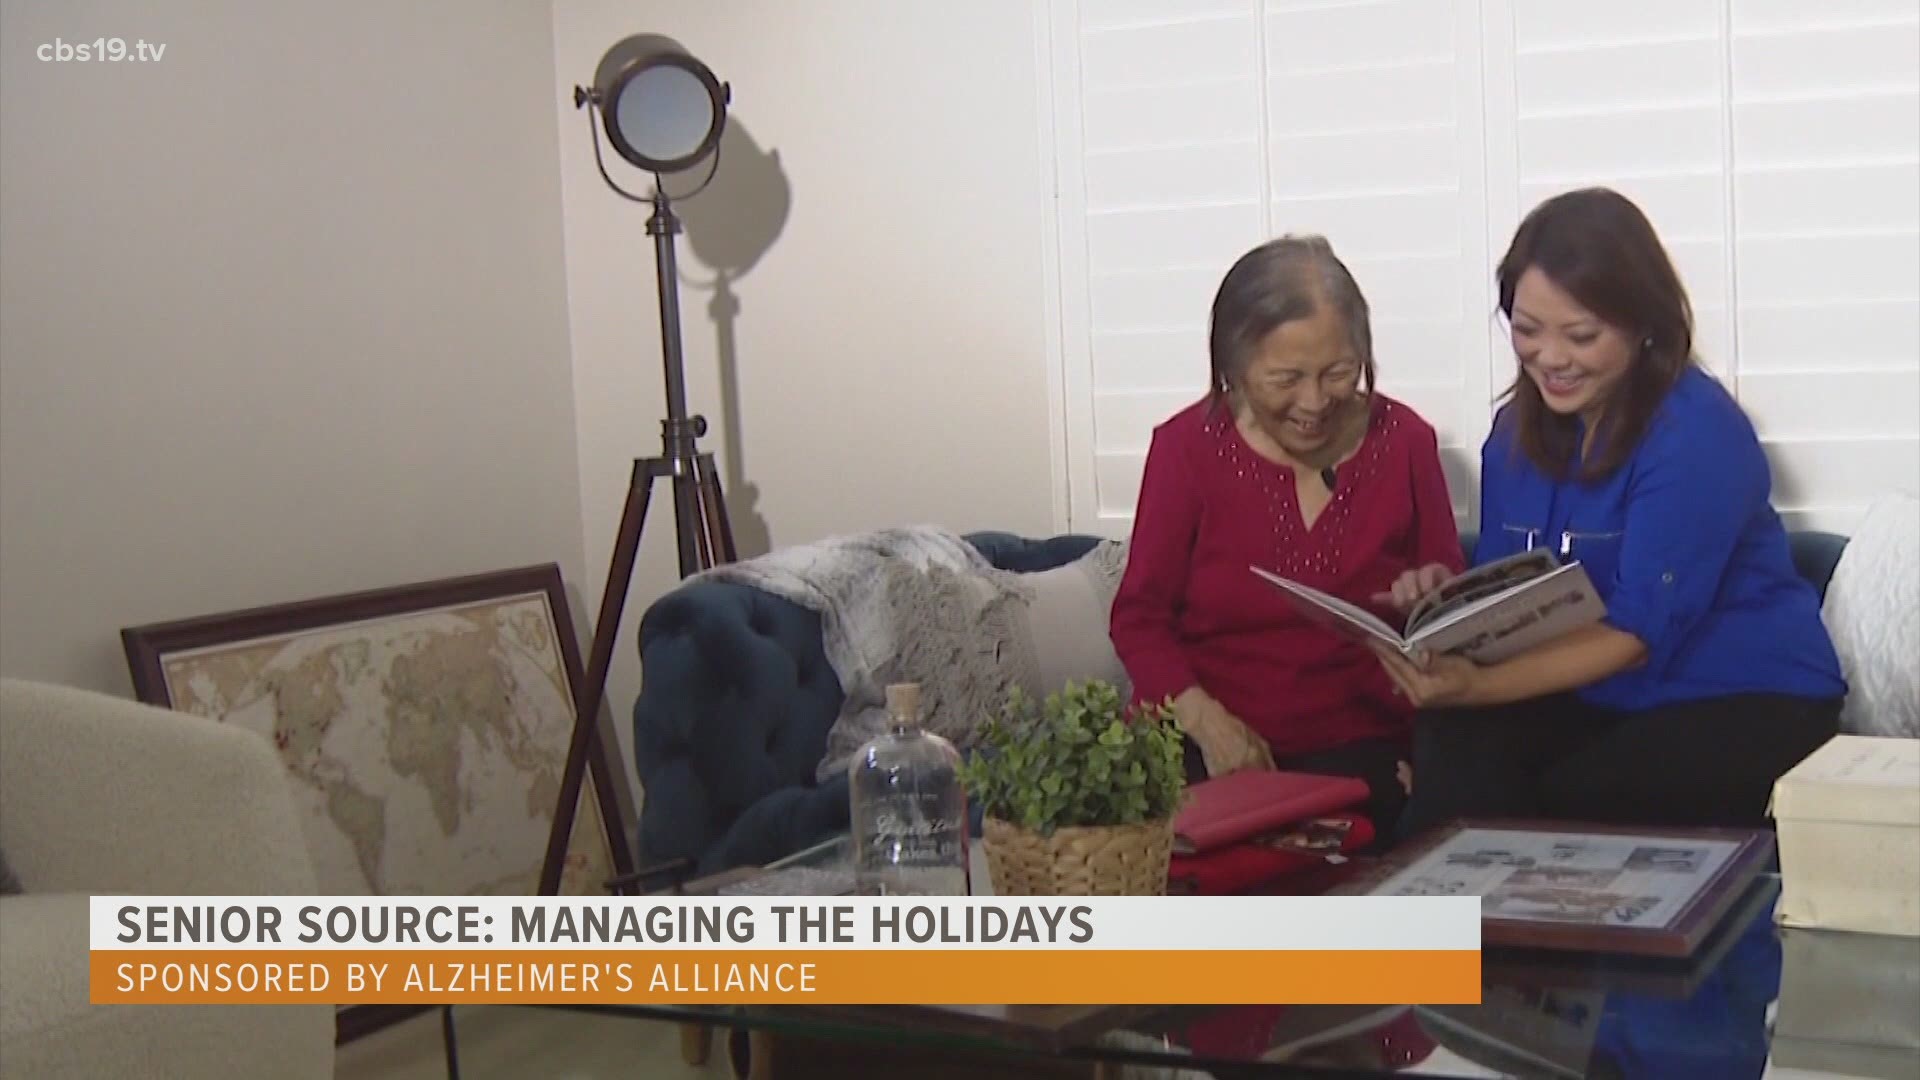 Our Senior Source partners, the Alzheimer's Alliance of Smith County have some tips to help.